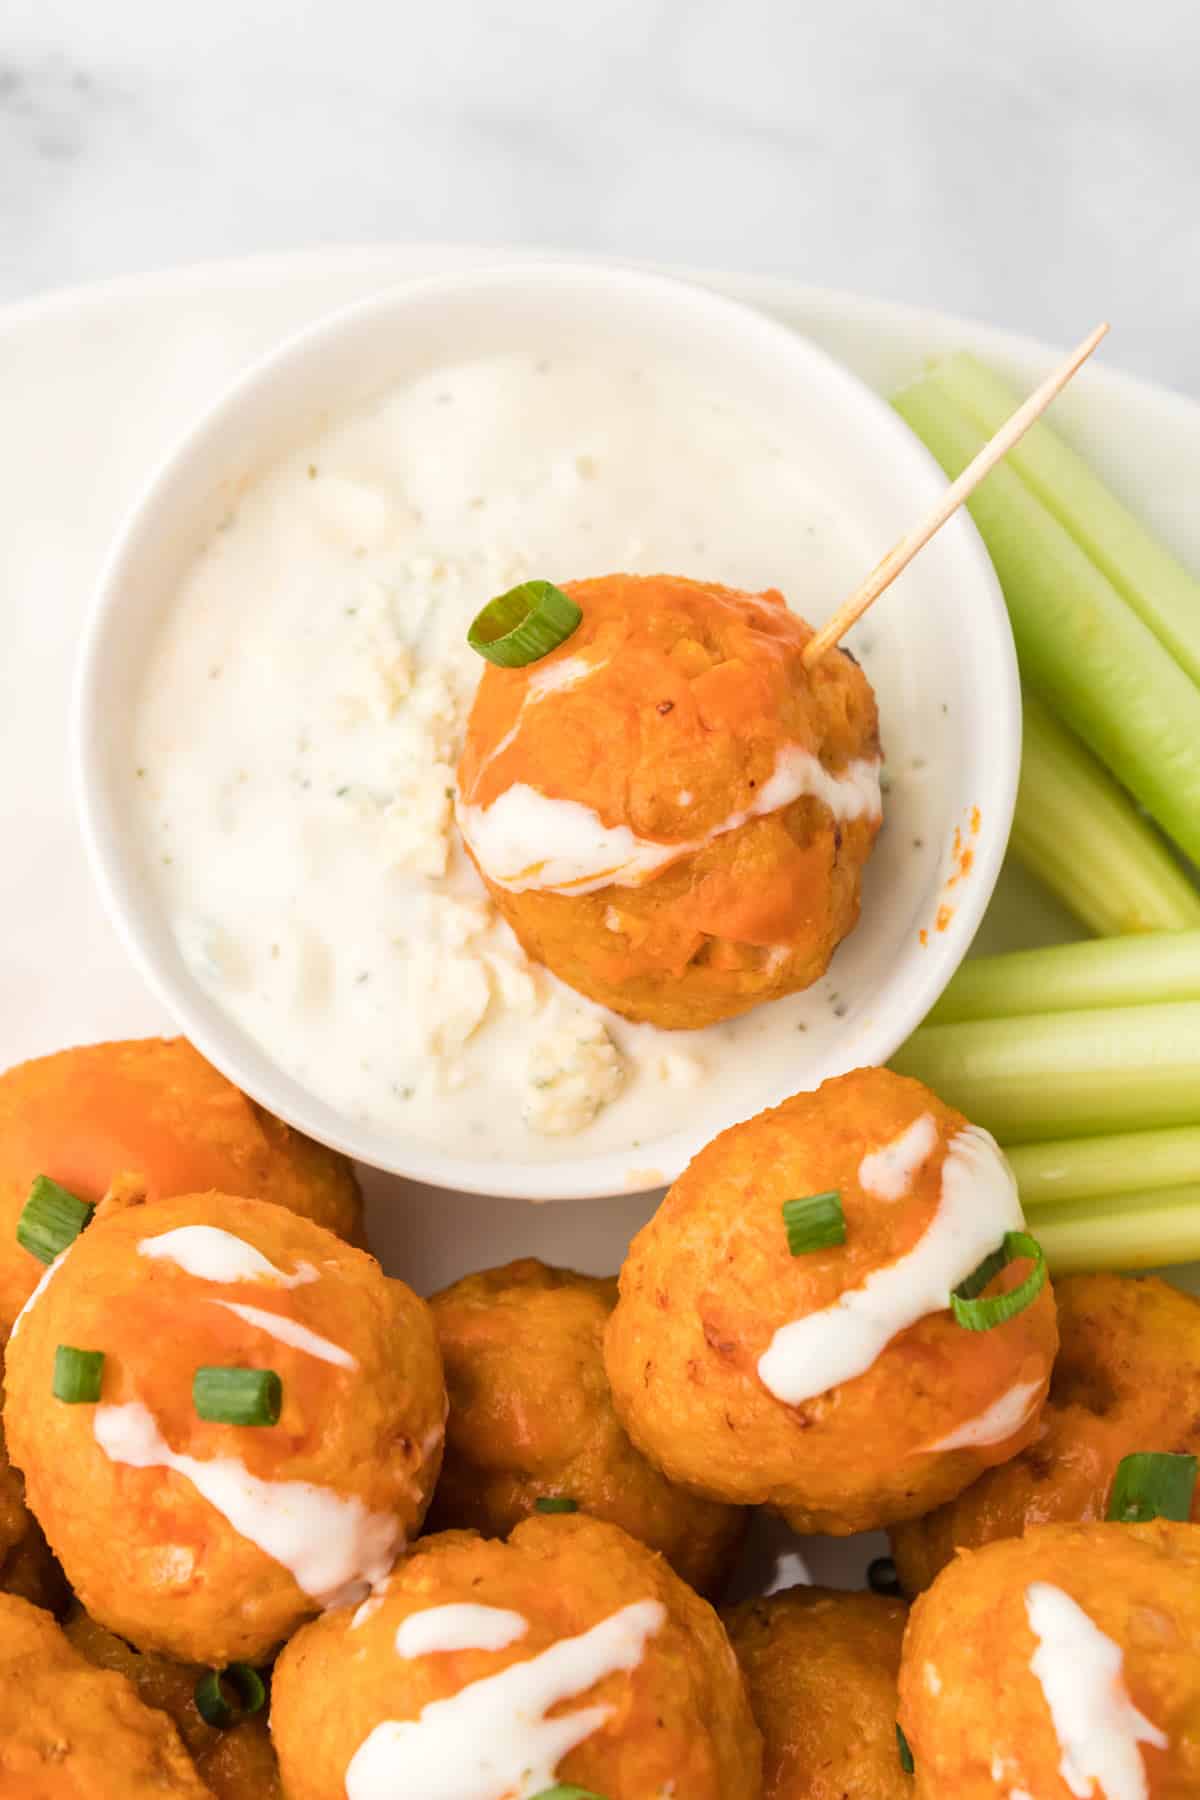 a meatball dipped in blue cheese dip.